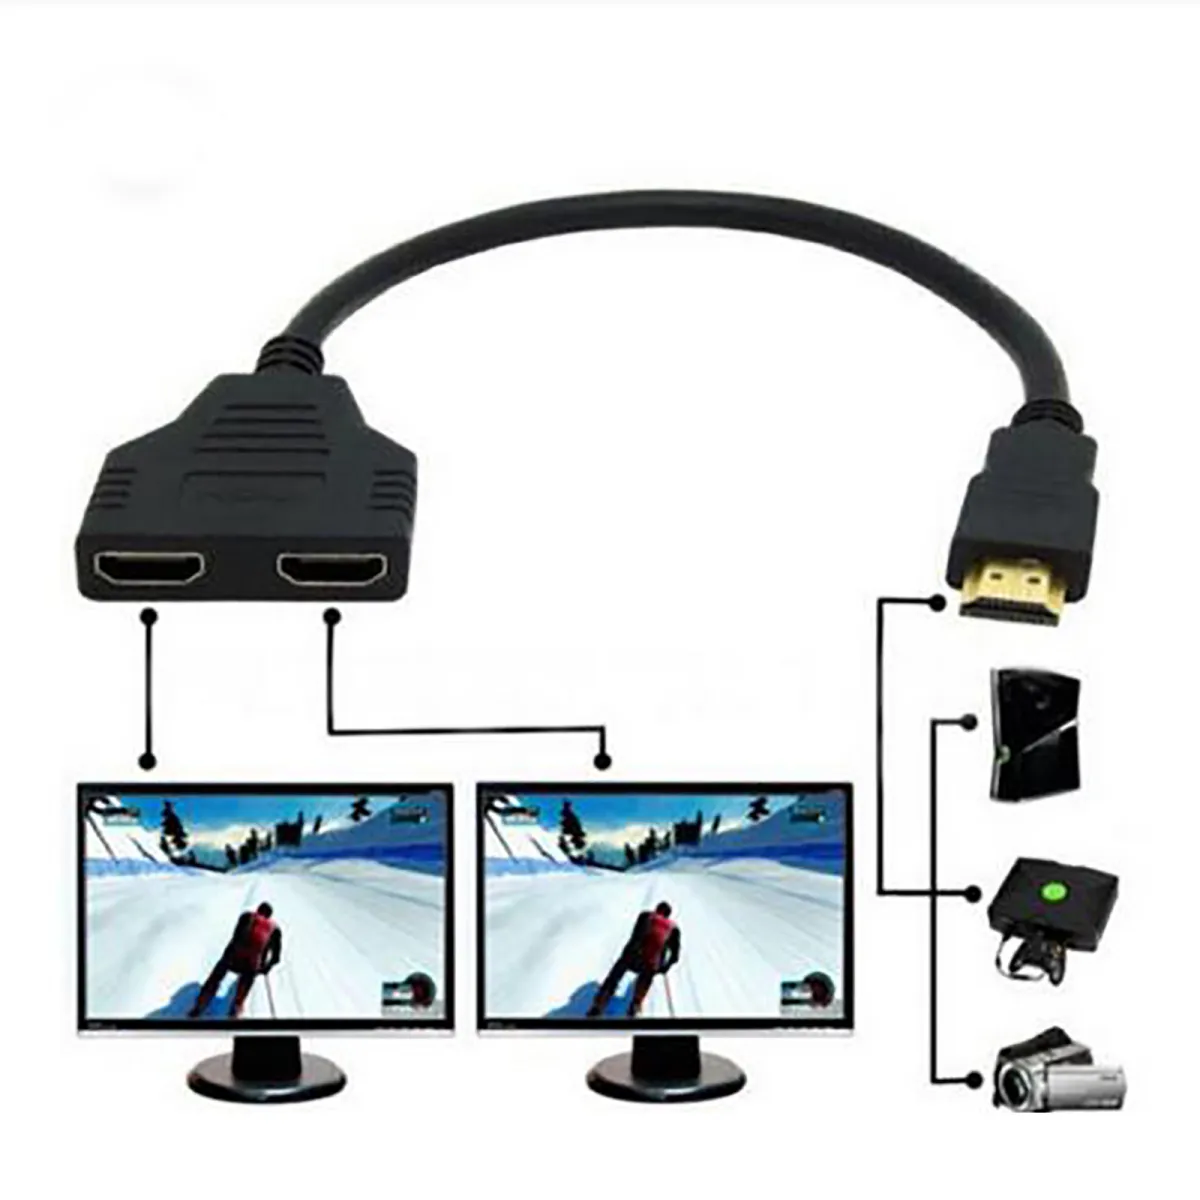 øjeblikkelig Harmoni For tidlig New HDMI Cable Splitter Cable 1 Male To Dual HDMI 2 Female Y Splitter  Adapter | Lazada Singapore